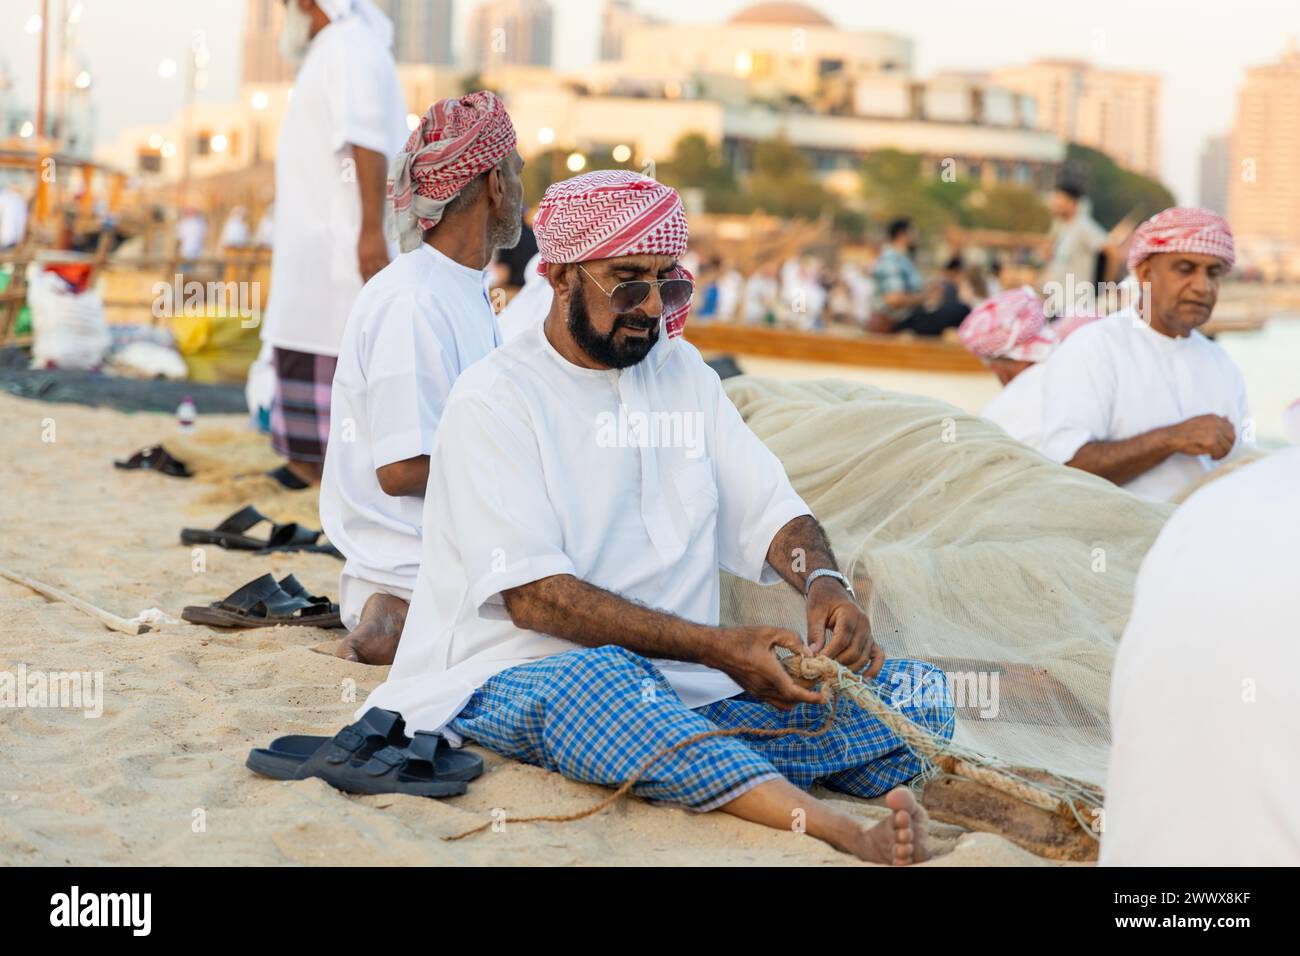 An Arab Man Fixing the Fishing Net During the Dhow Festival in Katara Village. Stock Photo